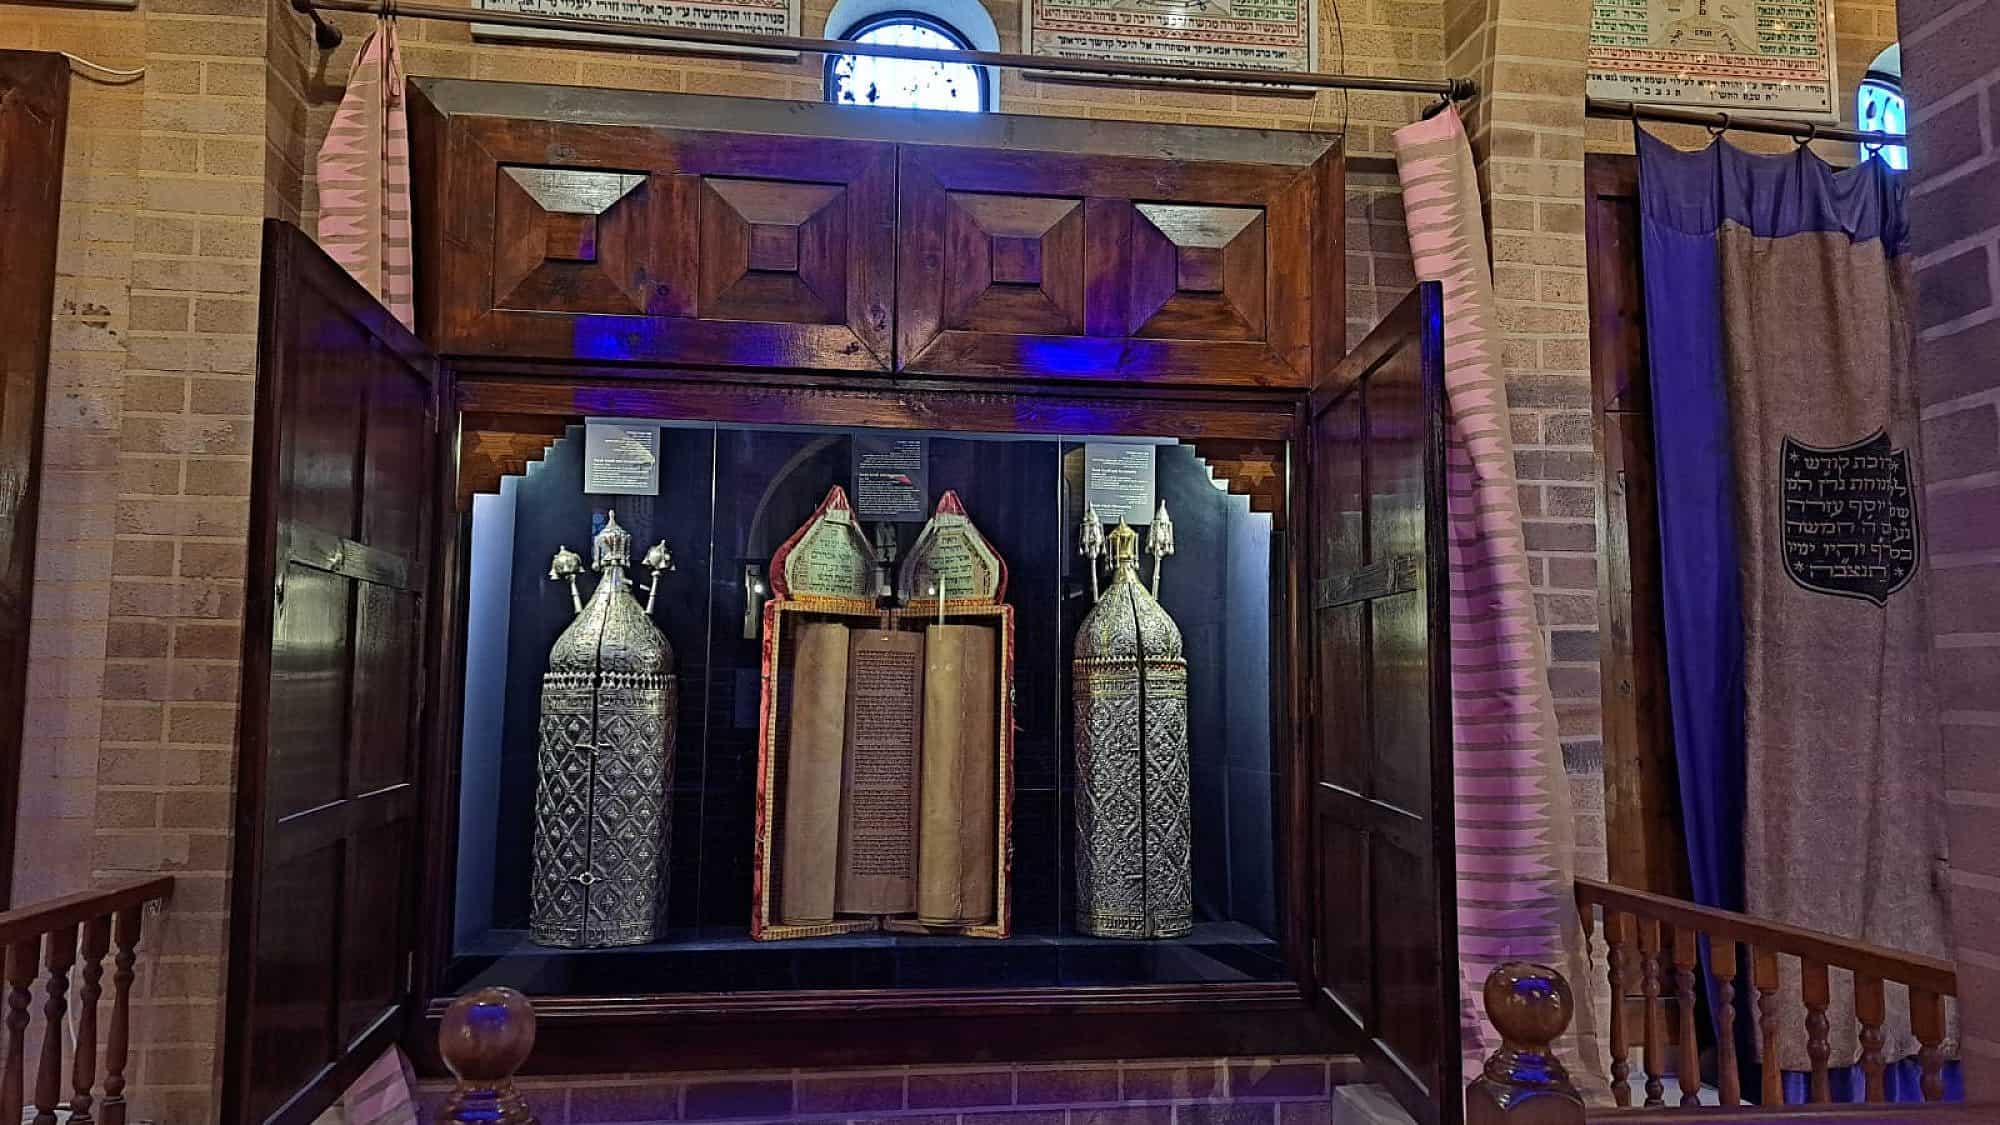 Torah scrolls of the Iraqi-Jewish community at the Babylonian Jewry Heritage Center in Or Yehuda. Photo by Lily Shor.